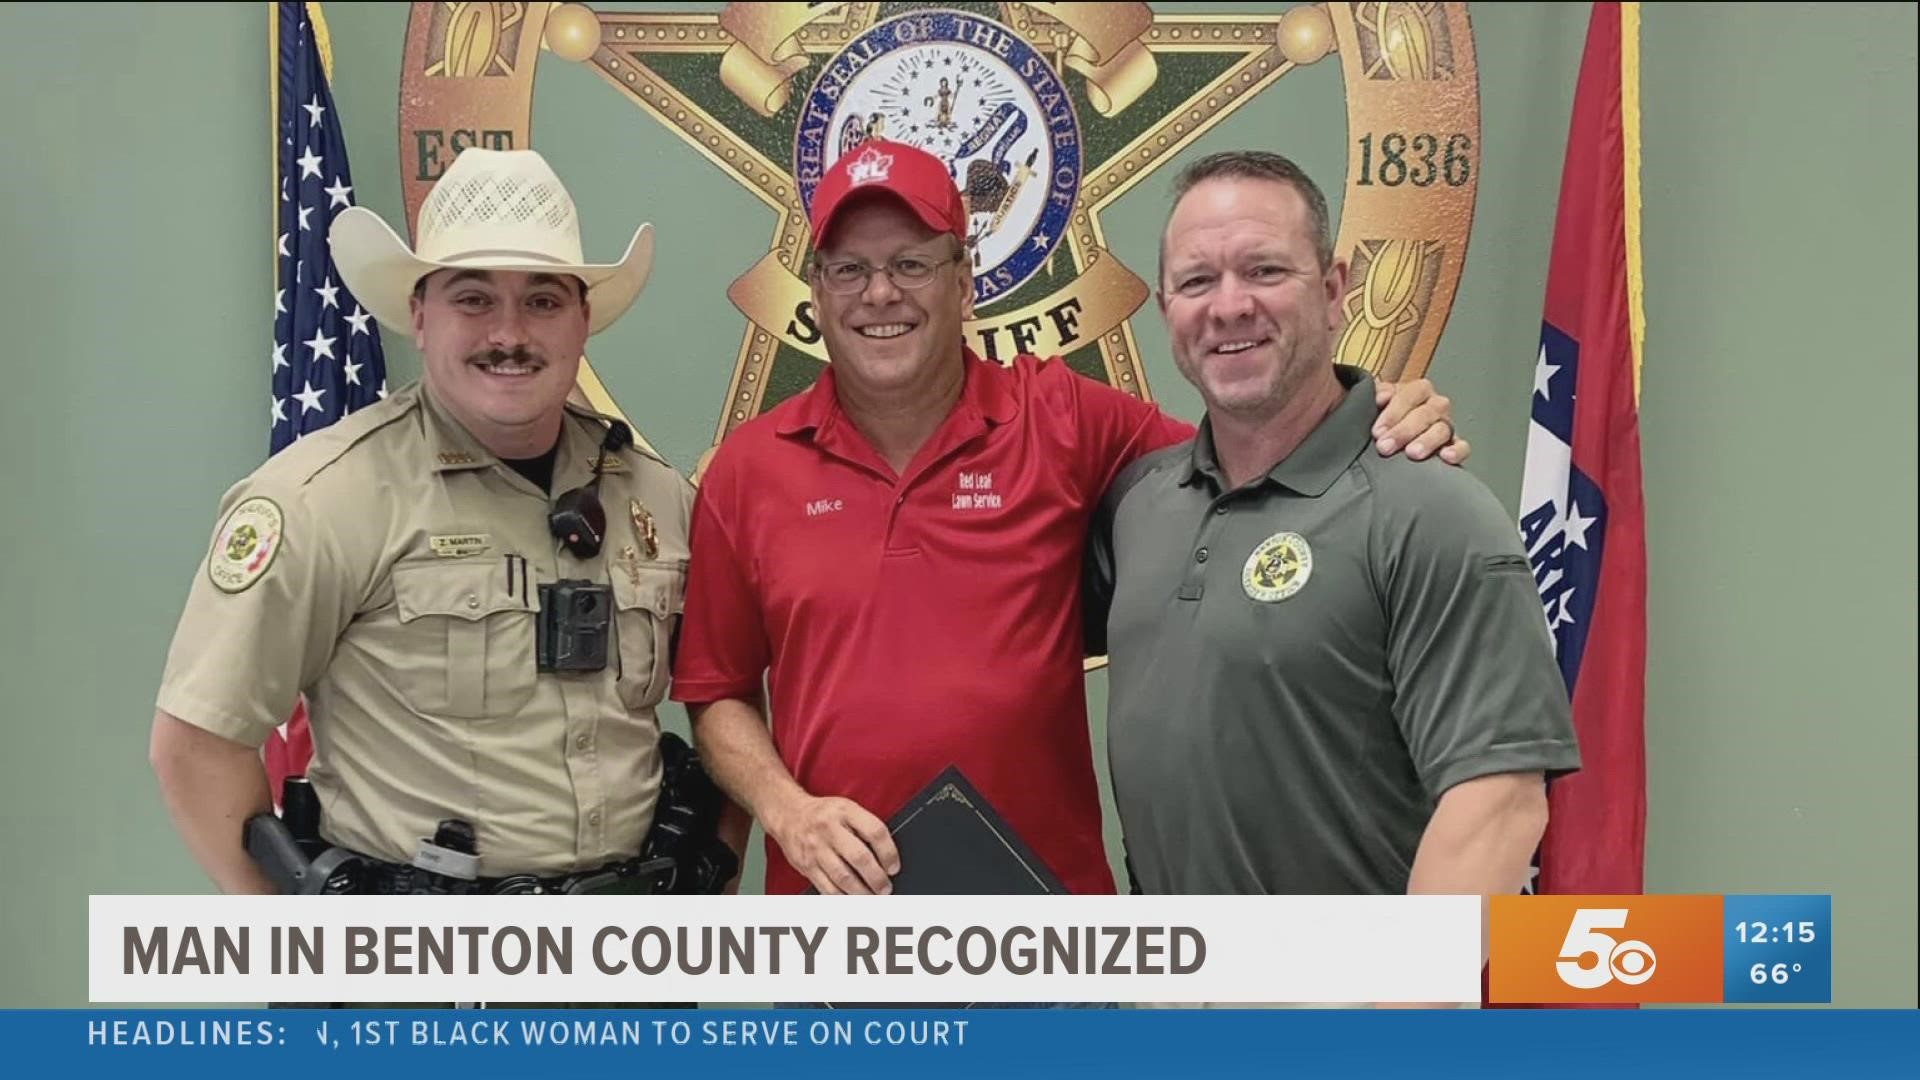 Michael Oldham was recognized for helping a Benton County deputy wrestle a man to the ground.